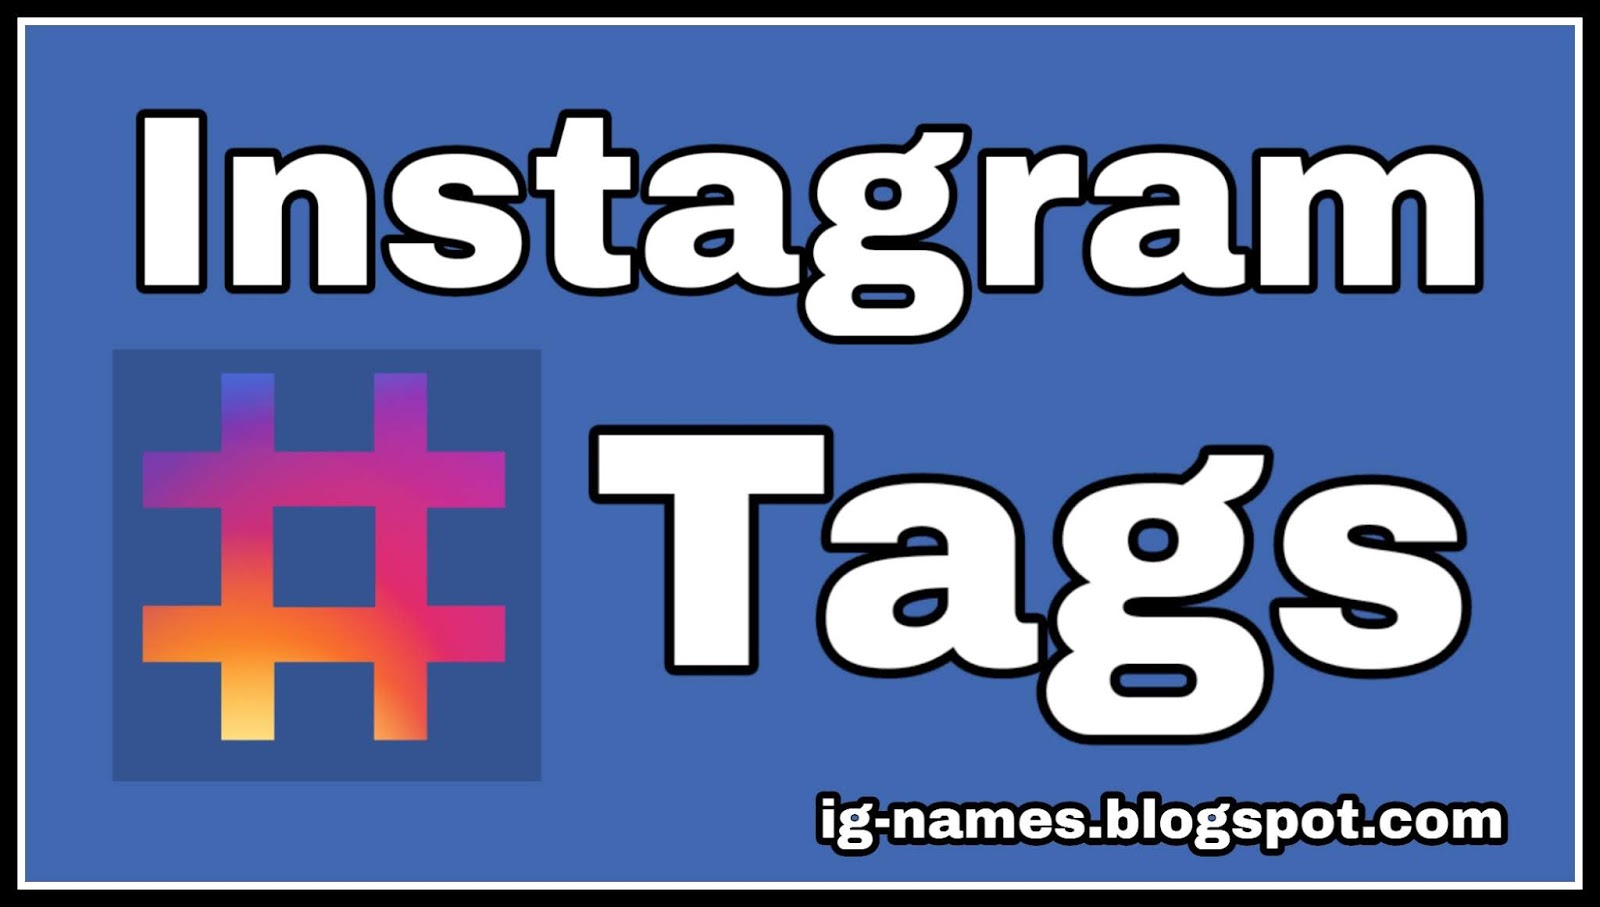  - hashtag instagram for likes and followers